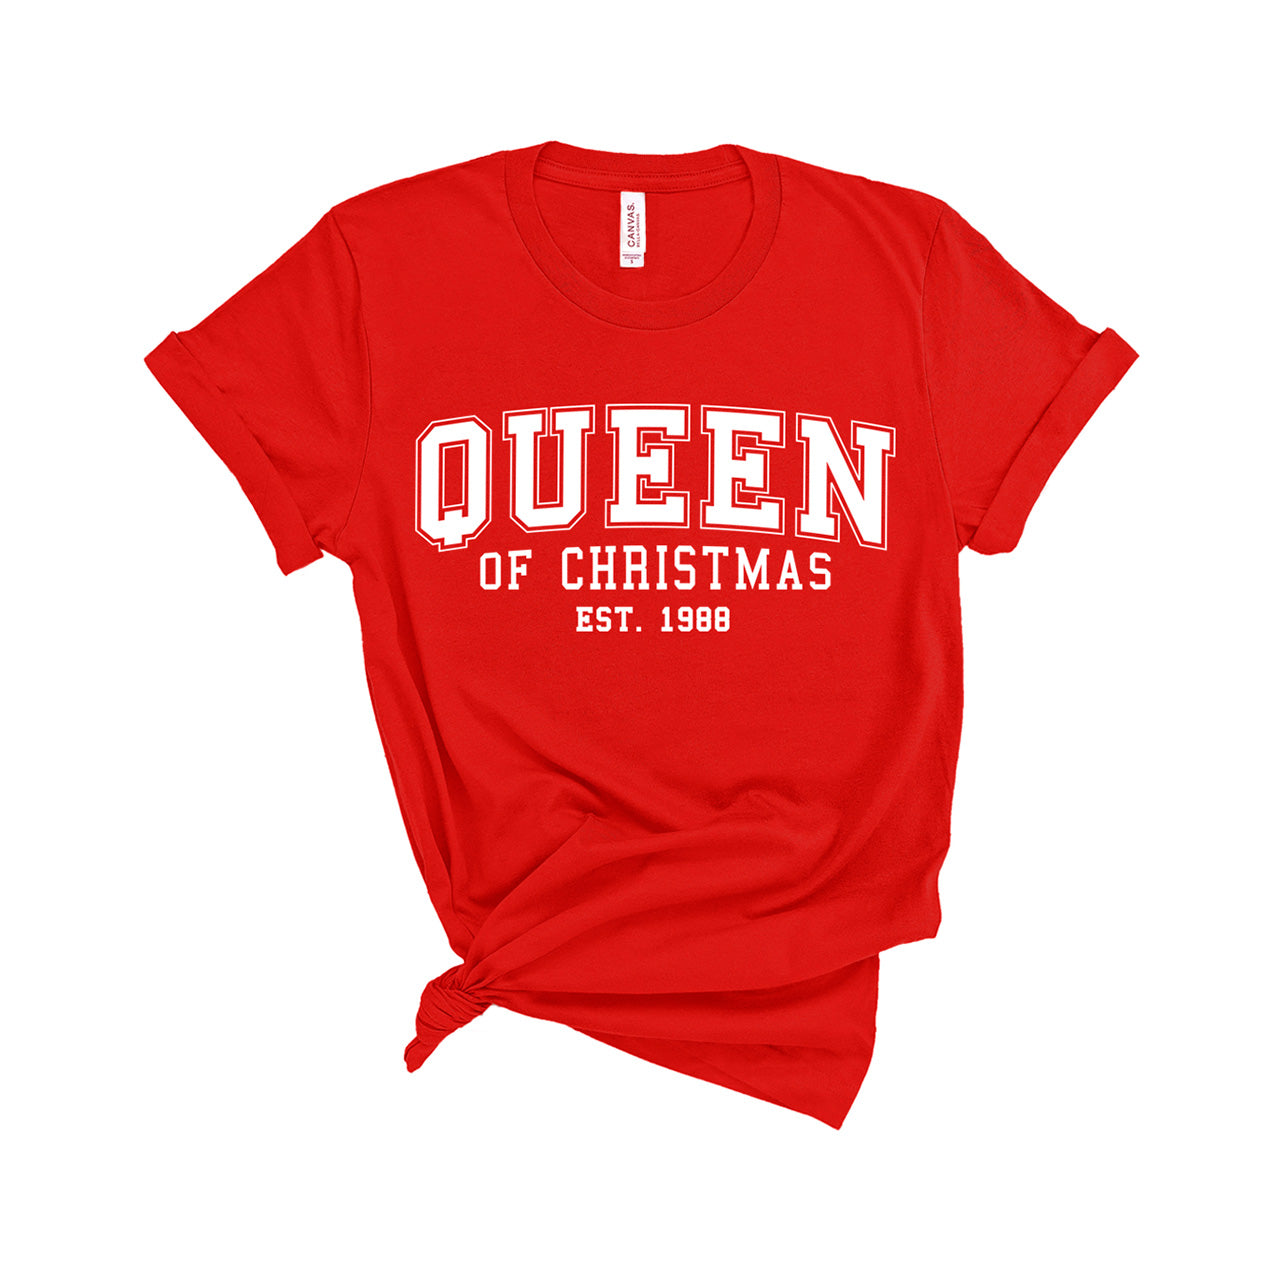 Queen of Christmas -  Personalised Year - Unisex Fit T-Shirt